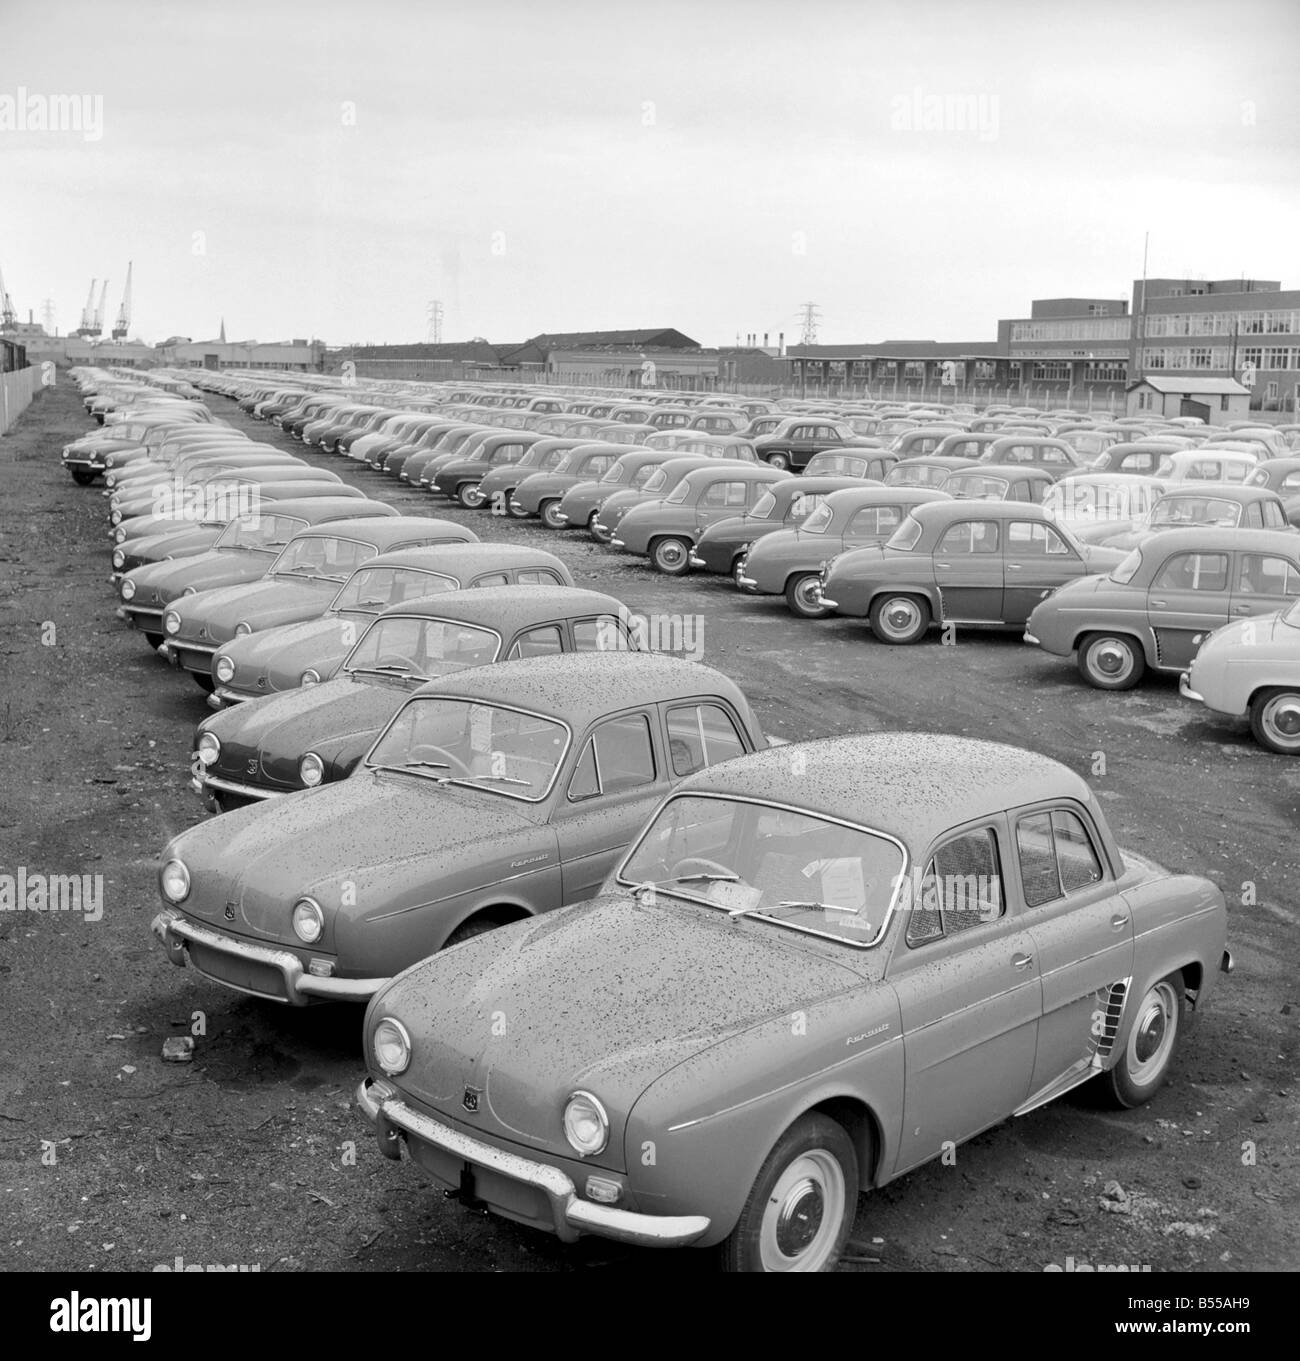 Car Park: Renault Cars: Pictures show some of the 3 to 4 thousand Renault Cars, parked in Southampton Docks. June 1960 M4354 Stock Photo